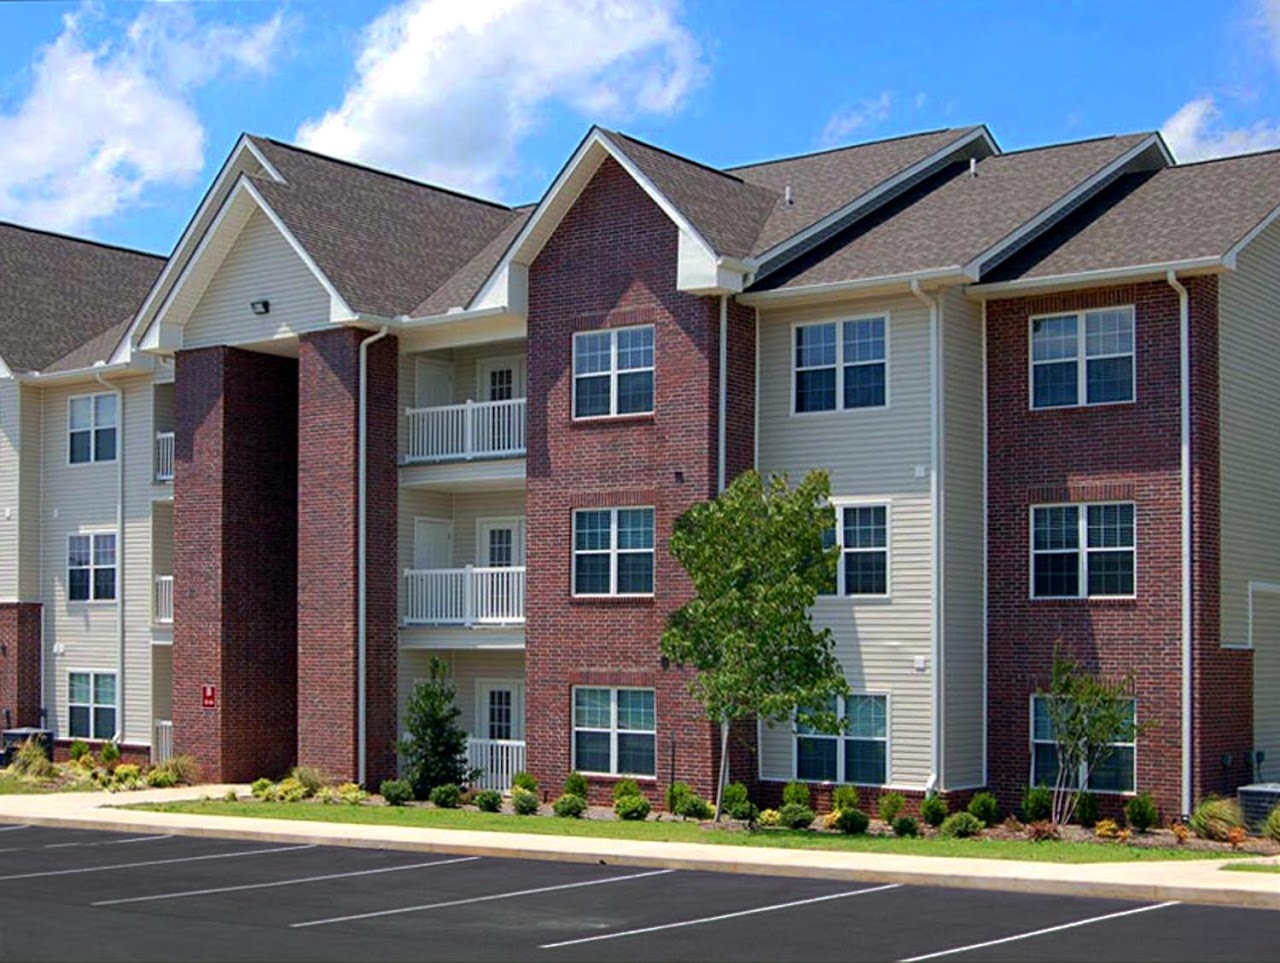 Photo of THE RIDGE AT SHELBYVILLE. Affordable housing located at 260 ANTHONY LN SHELBYVILLE, TN 37160